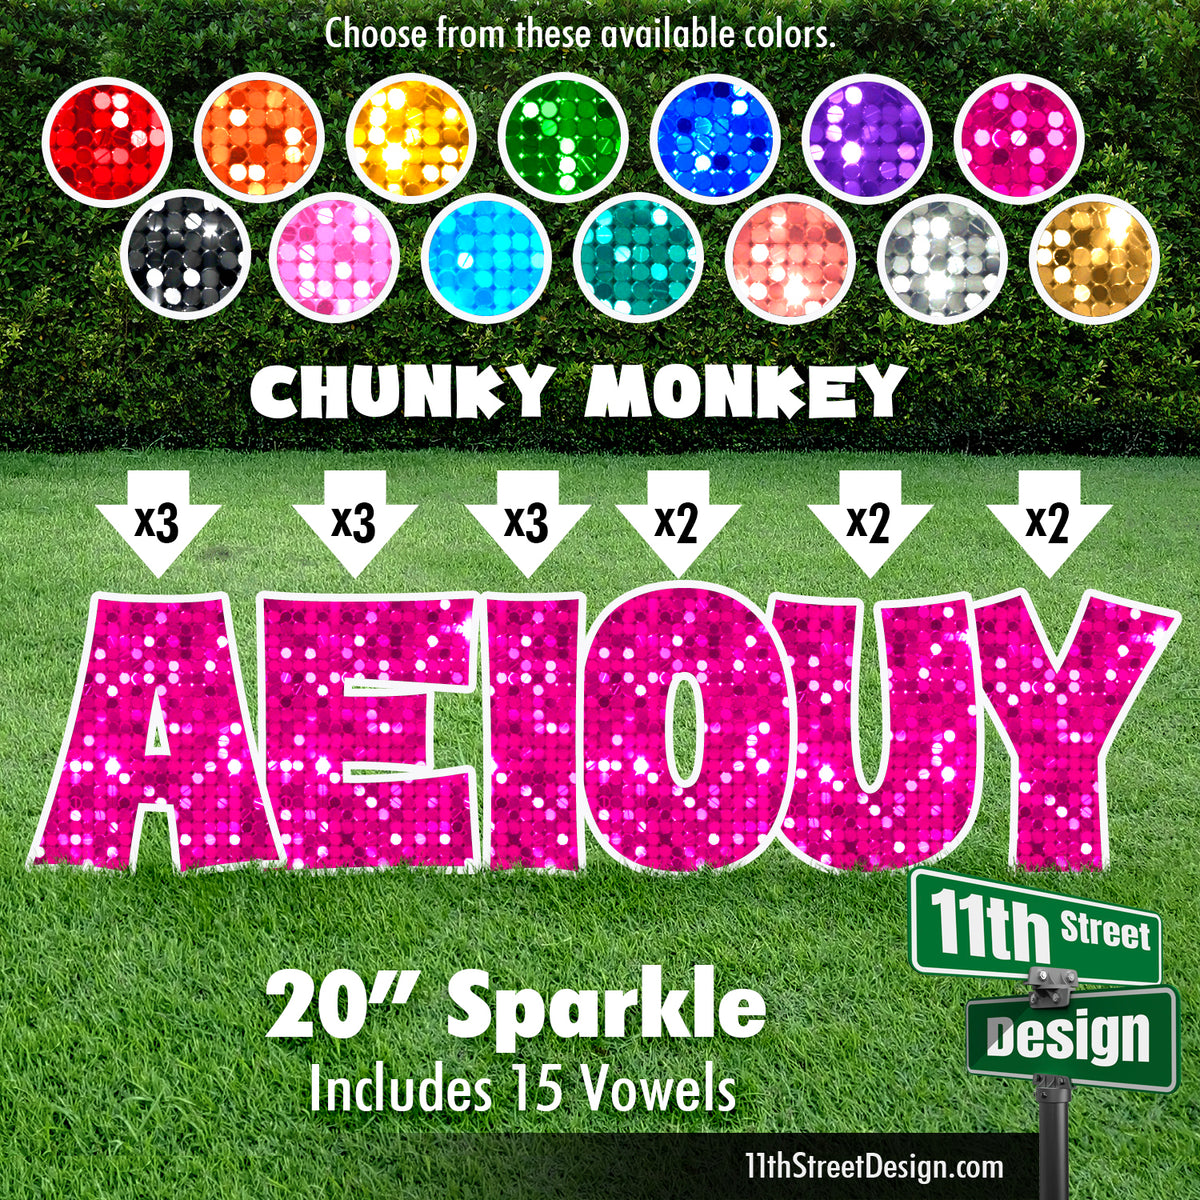 Sparkle 20&quot; Chunky Monkey Yard Card Set Includes 15 Vowels